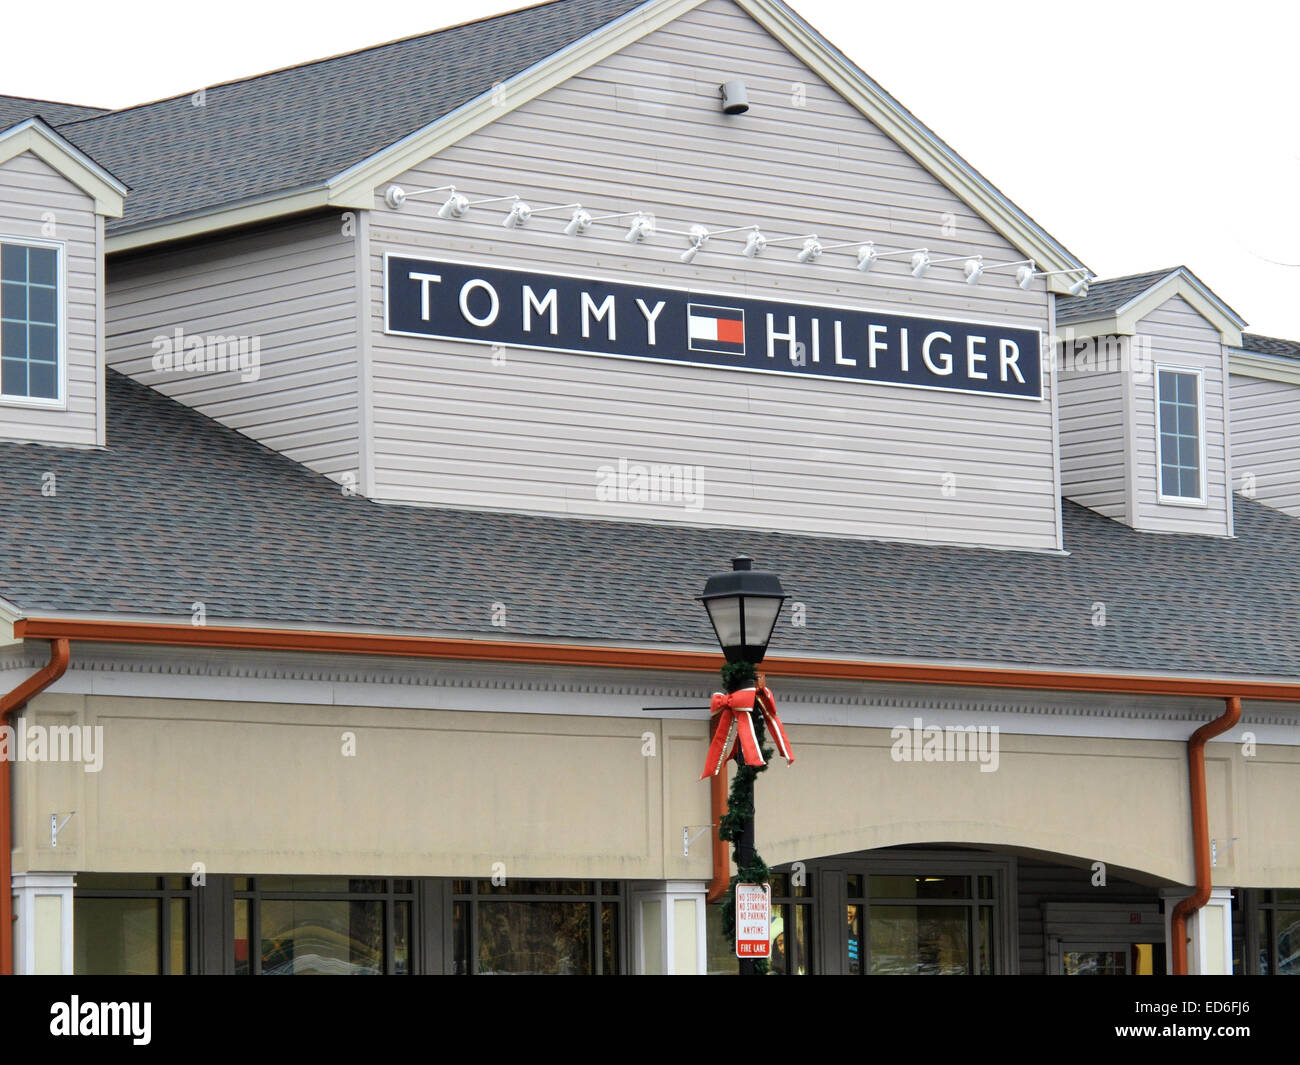 The shop sign for Tommy Hilfiger in Woodbury common Stock Photo - Alamy